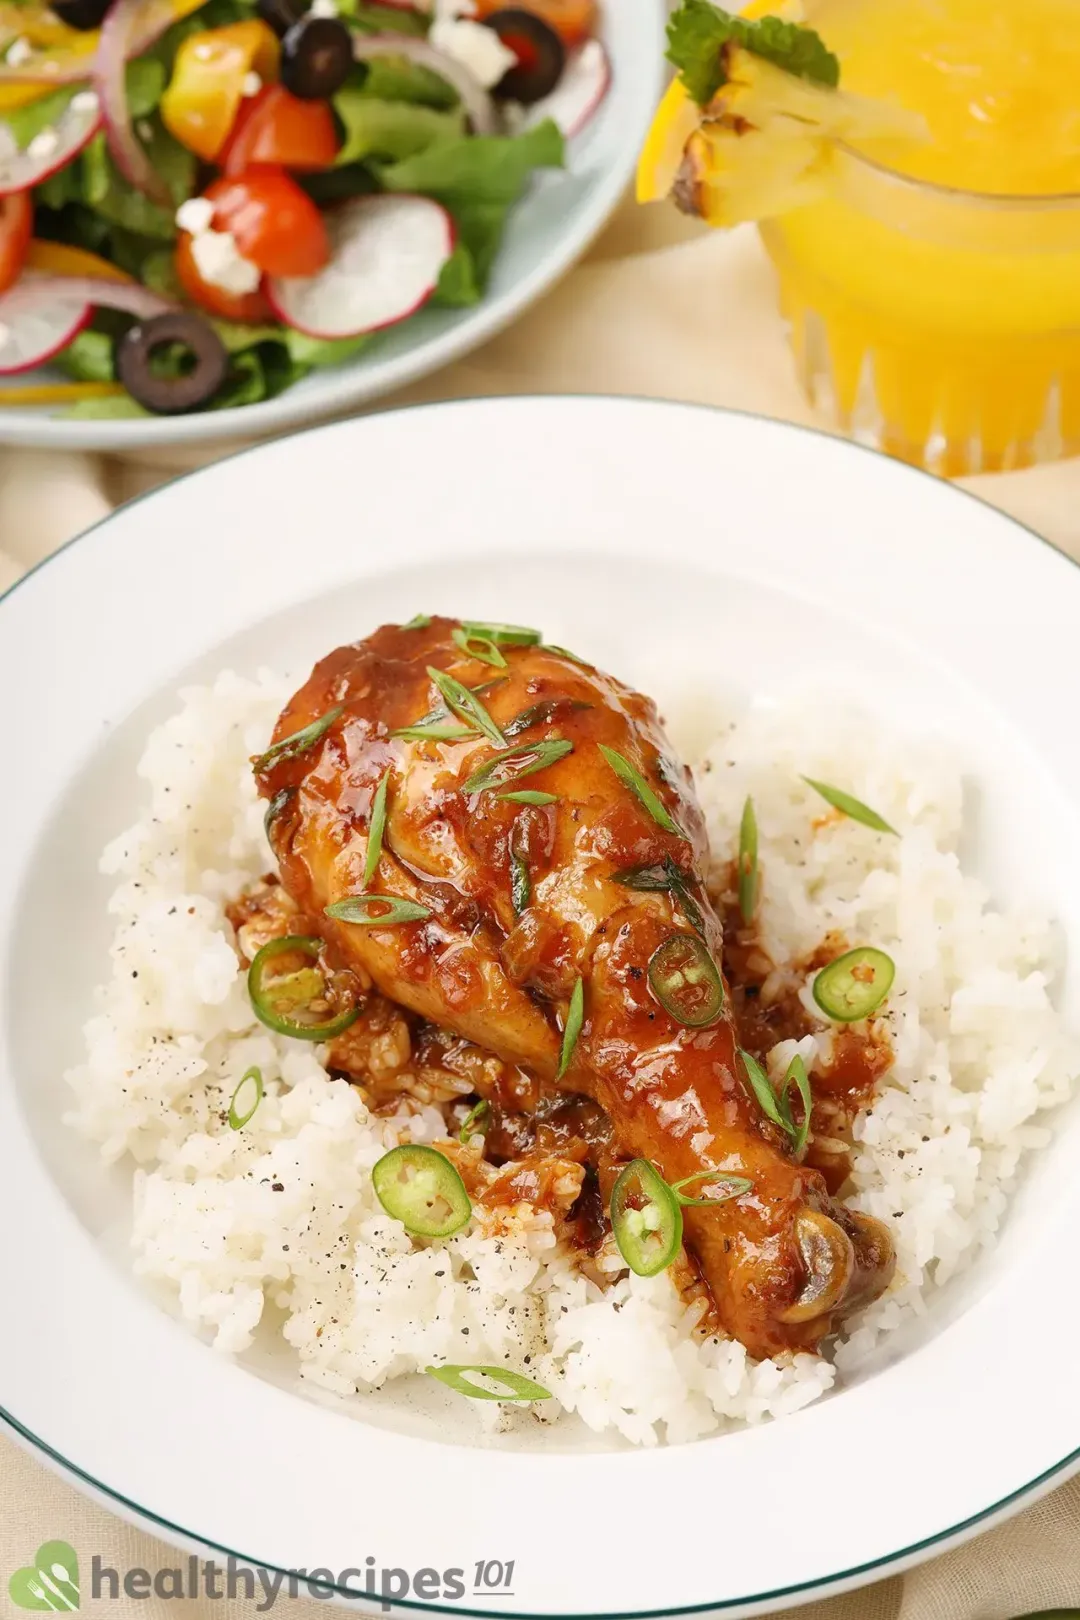 What to Serve With This Chicken Adobo